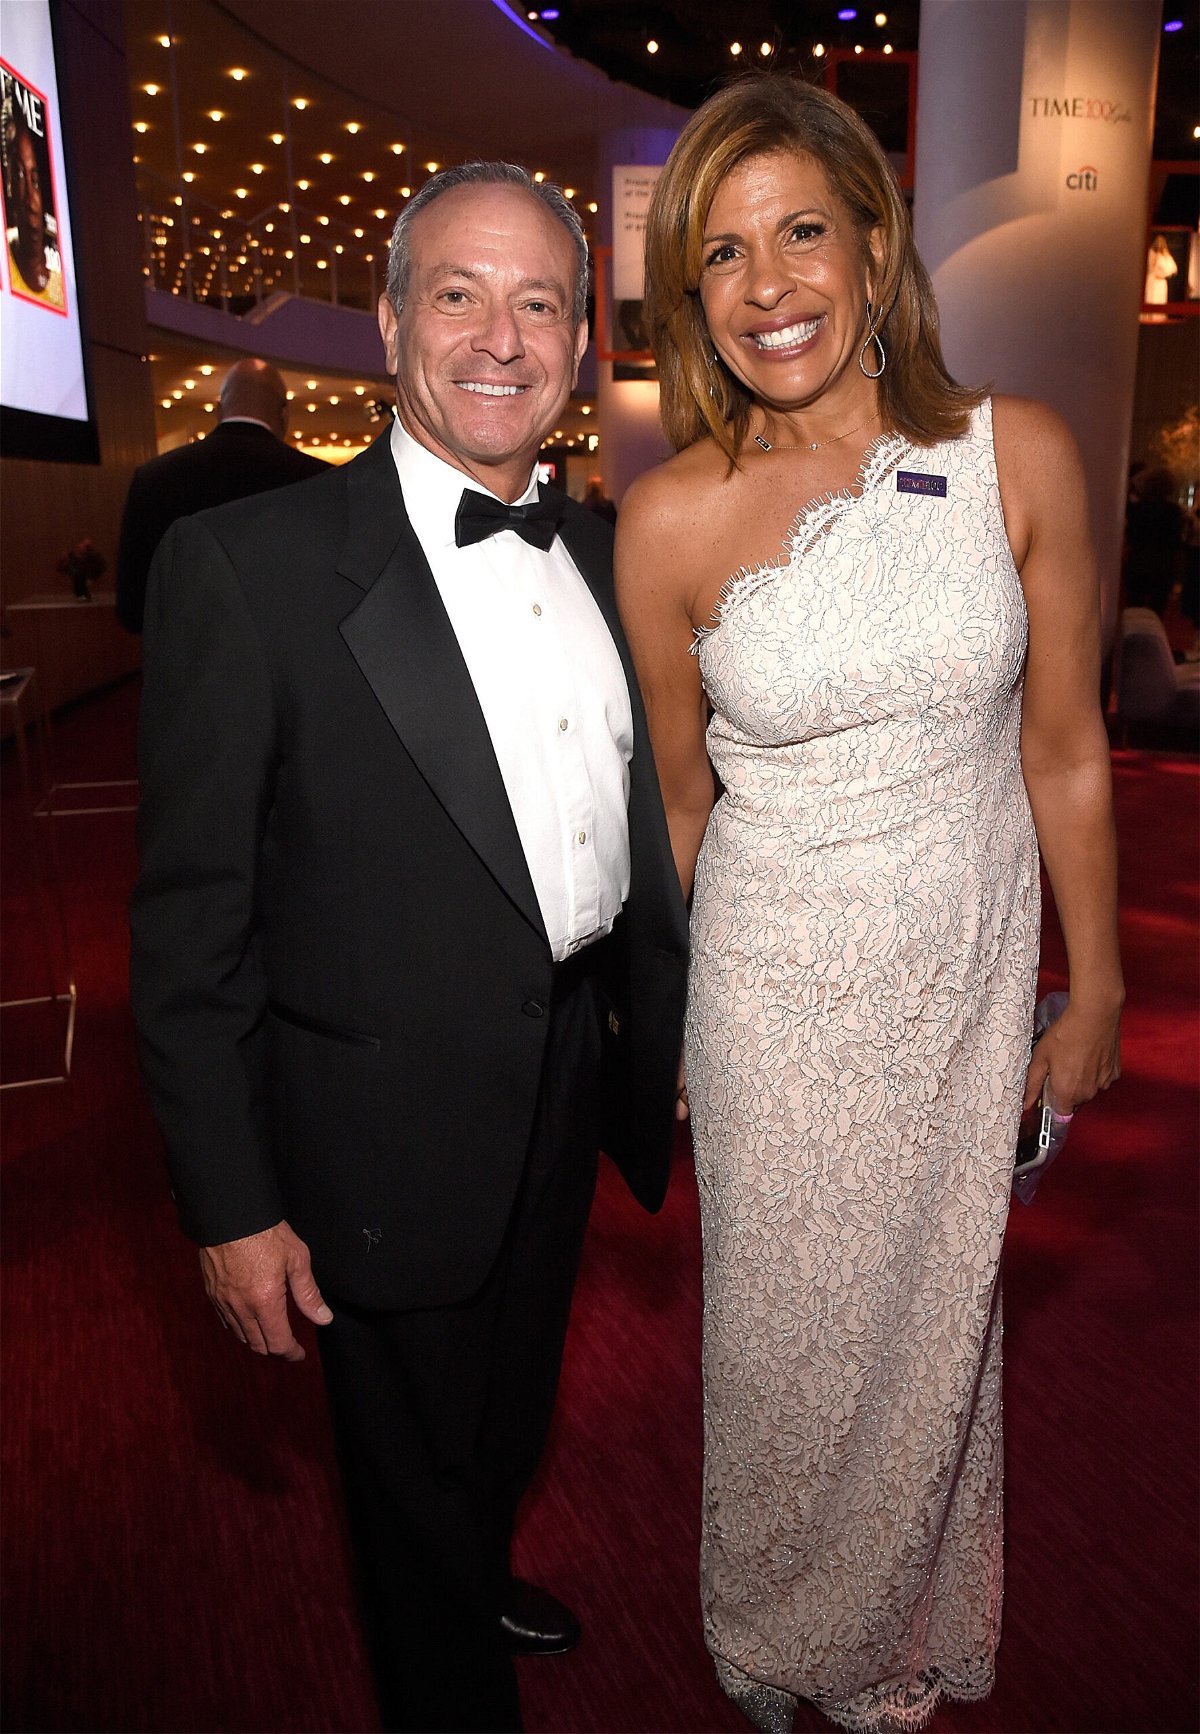 <i>Kevin Mazur/Getty Images for Time</i><br/>Joel Schiffman and Hoda Kotb